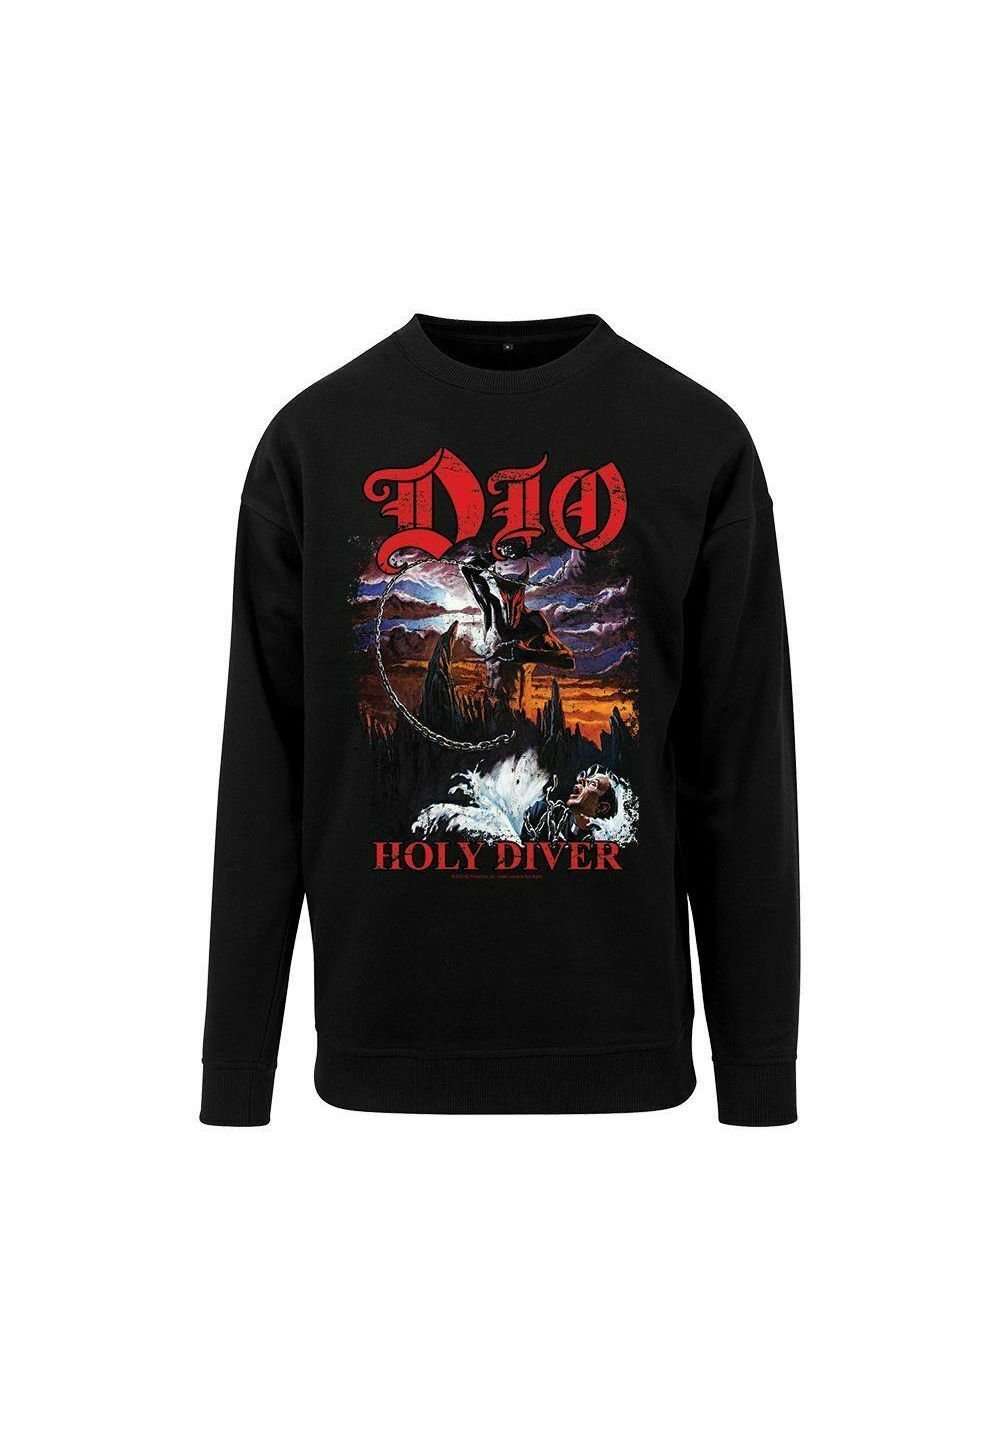 Кофта DIO HOLY DIVER DIO HOLY DIVER